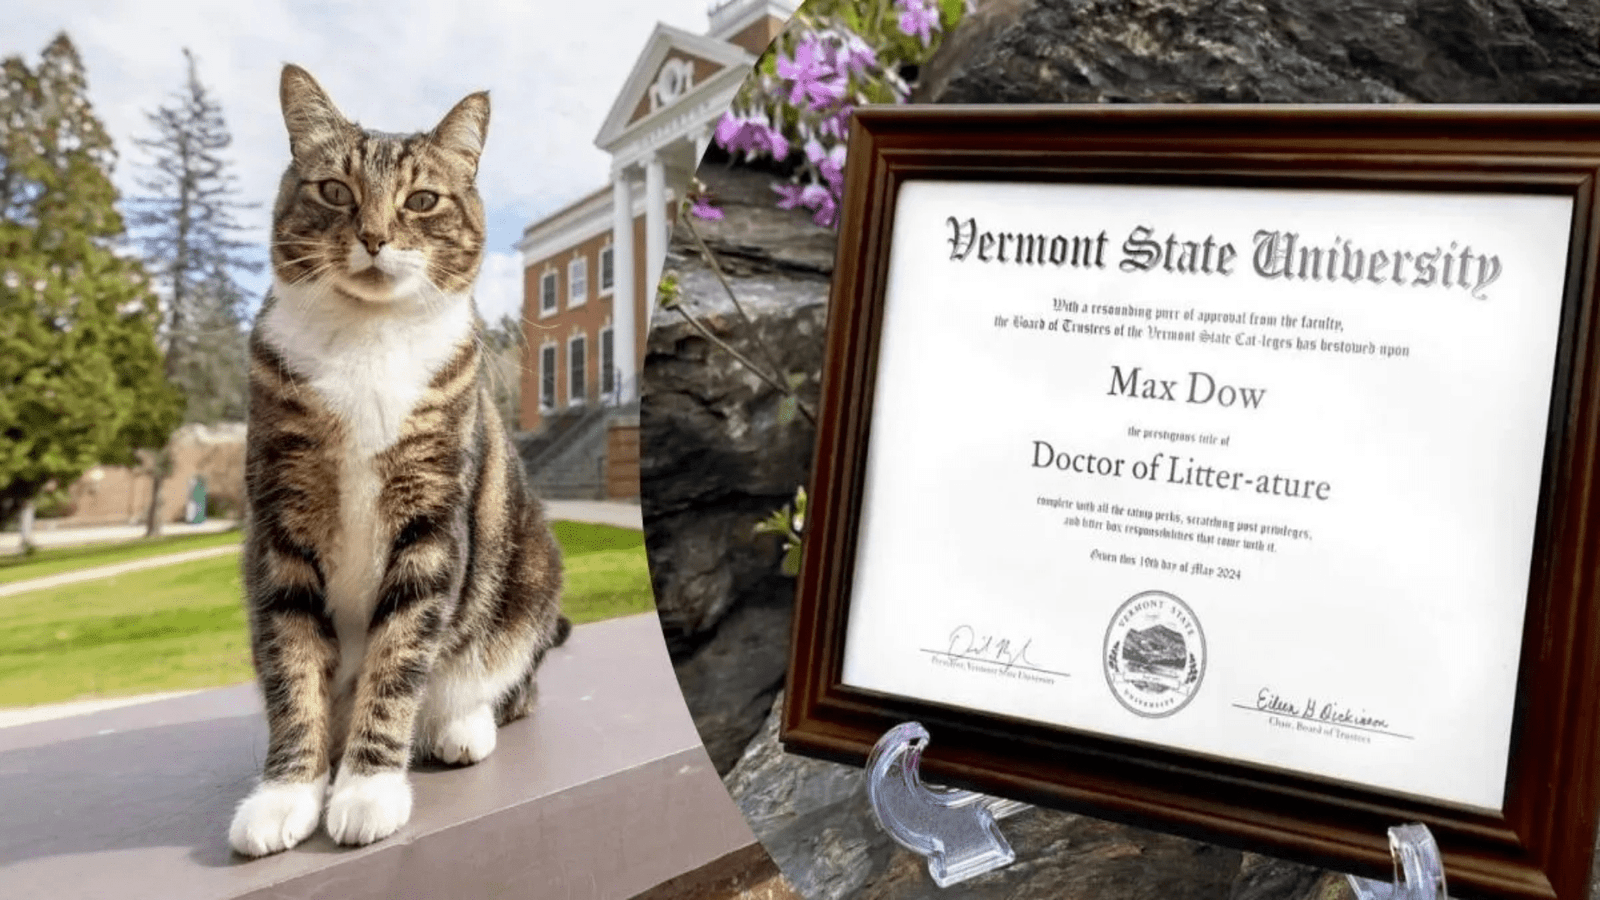 Beloved campus cat receives honorary degree from Vermont University